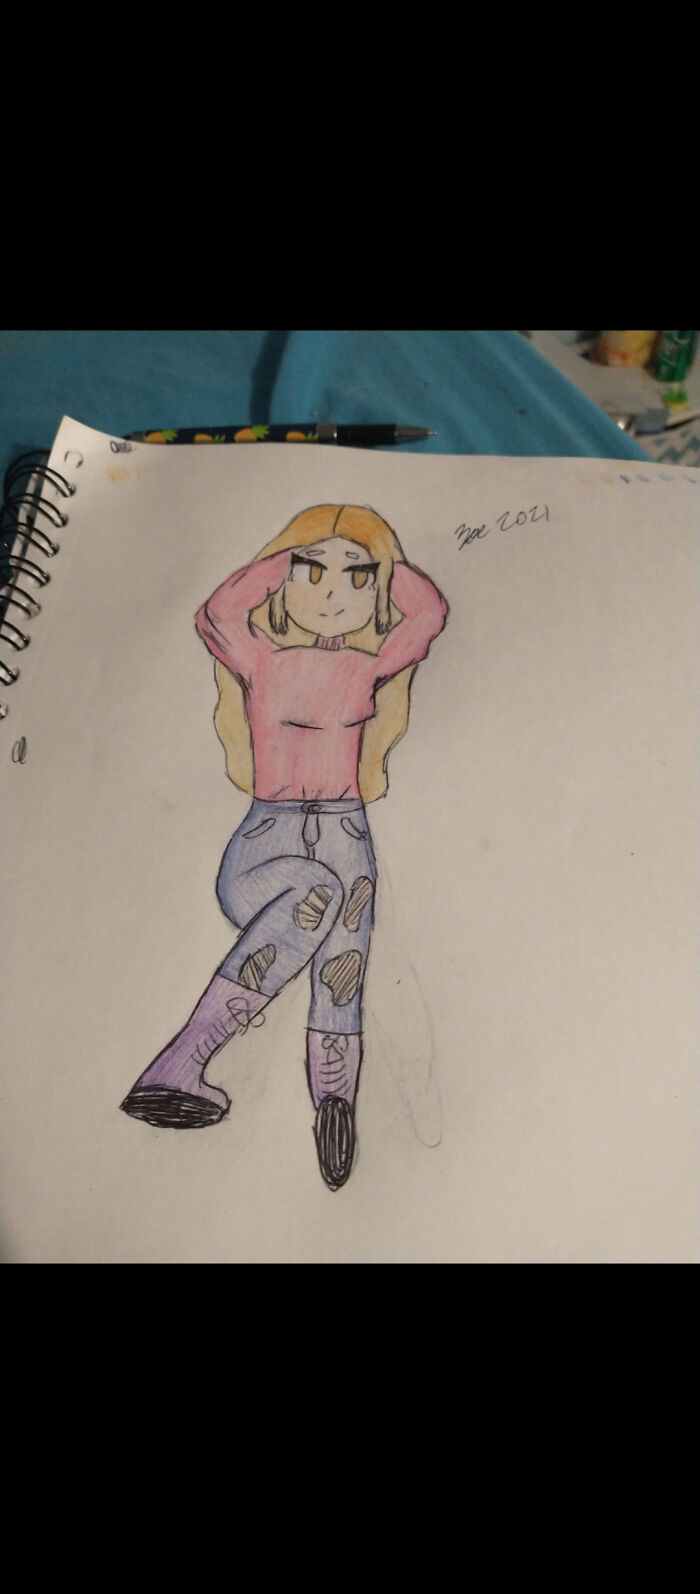 I Drew This Dec 17 2021 And I'm Really Proud Of It Still Bc Of The Posing And Coloring. Physical Copy Got Destroyed By Fanta But I Have The Photo :)